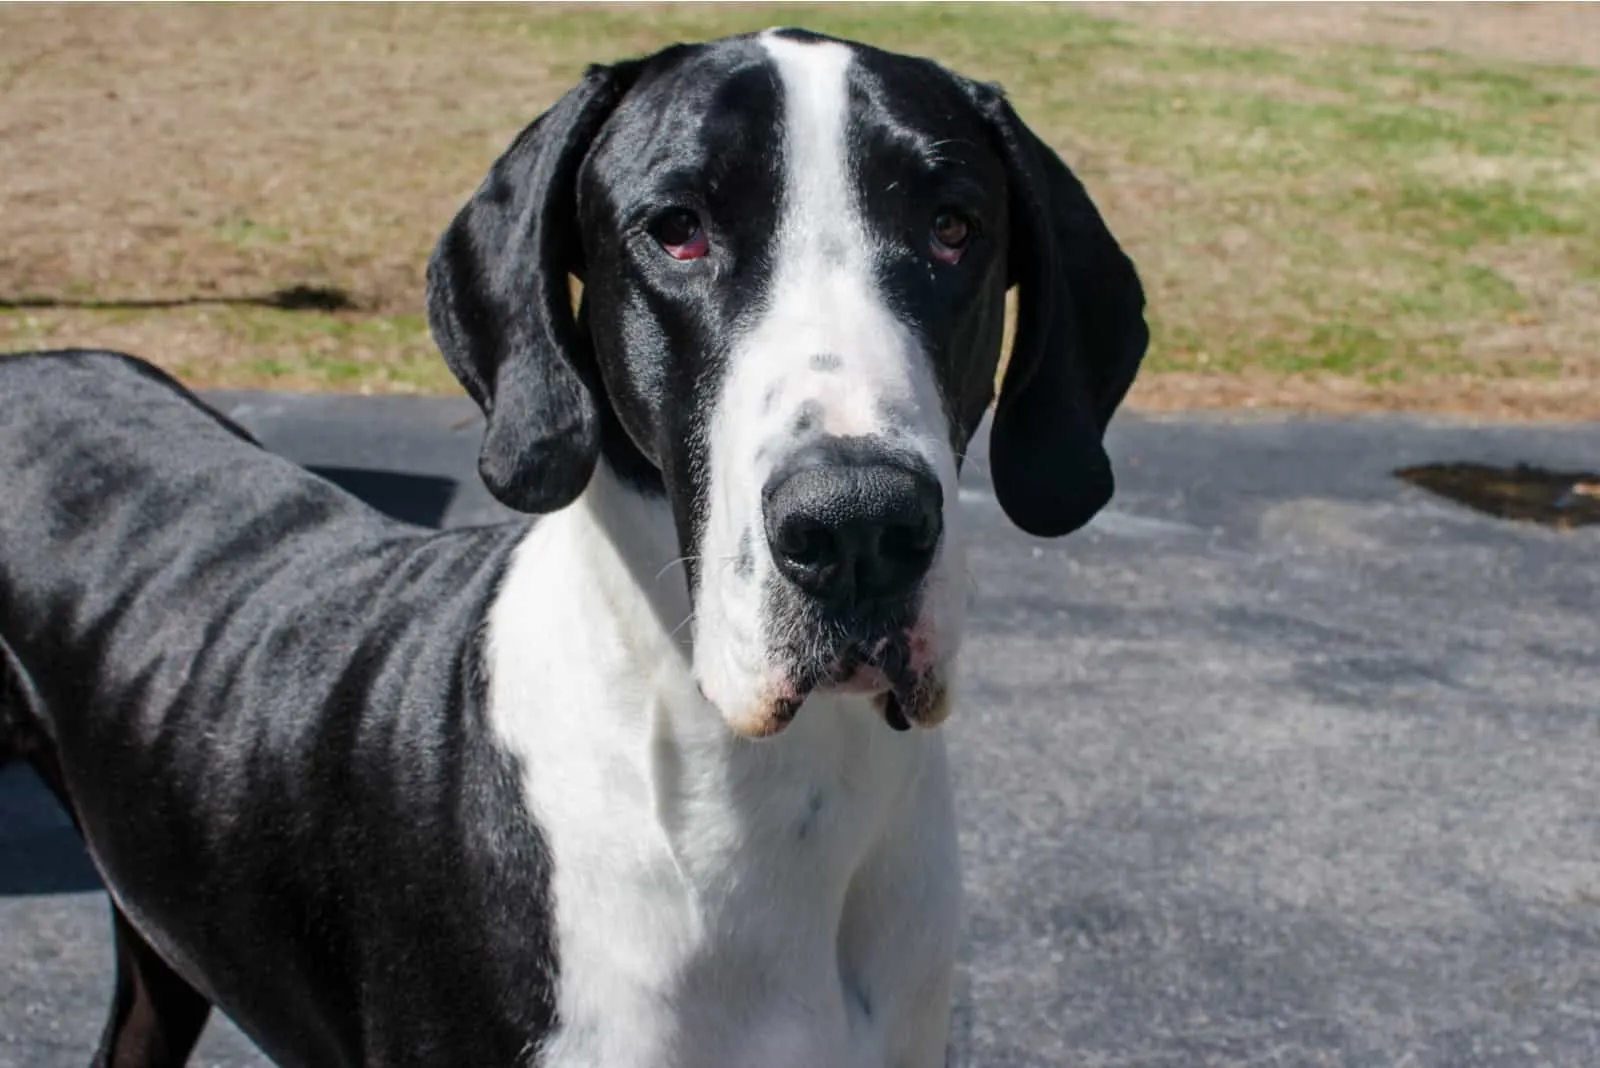 Black and white great dane standing